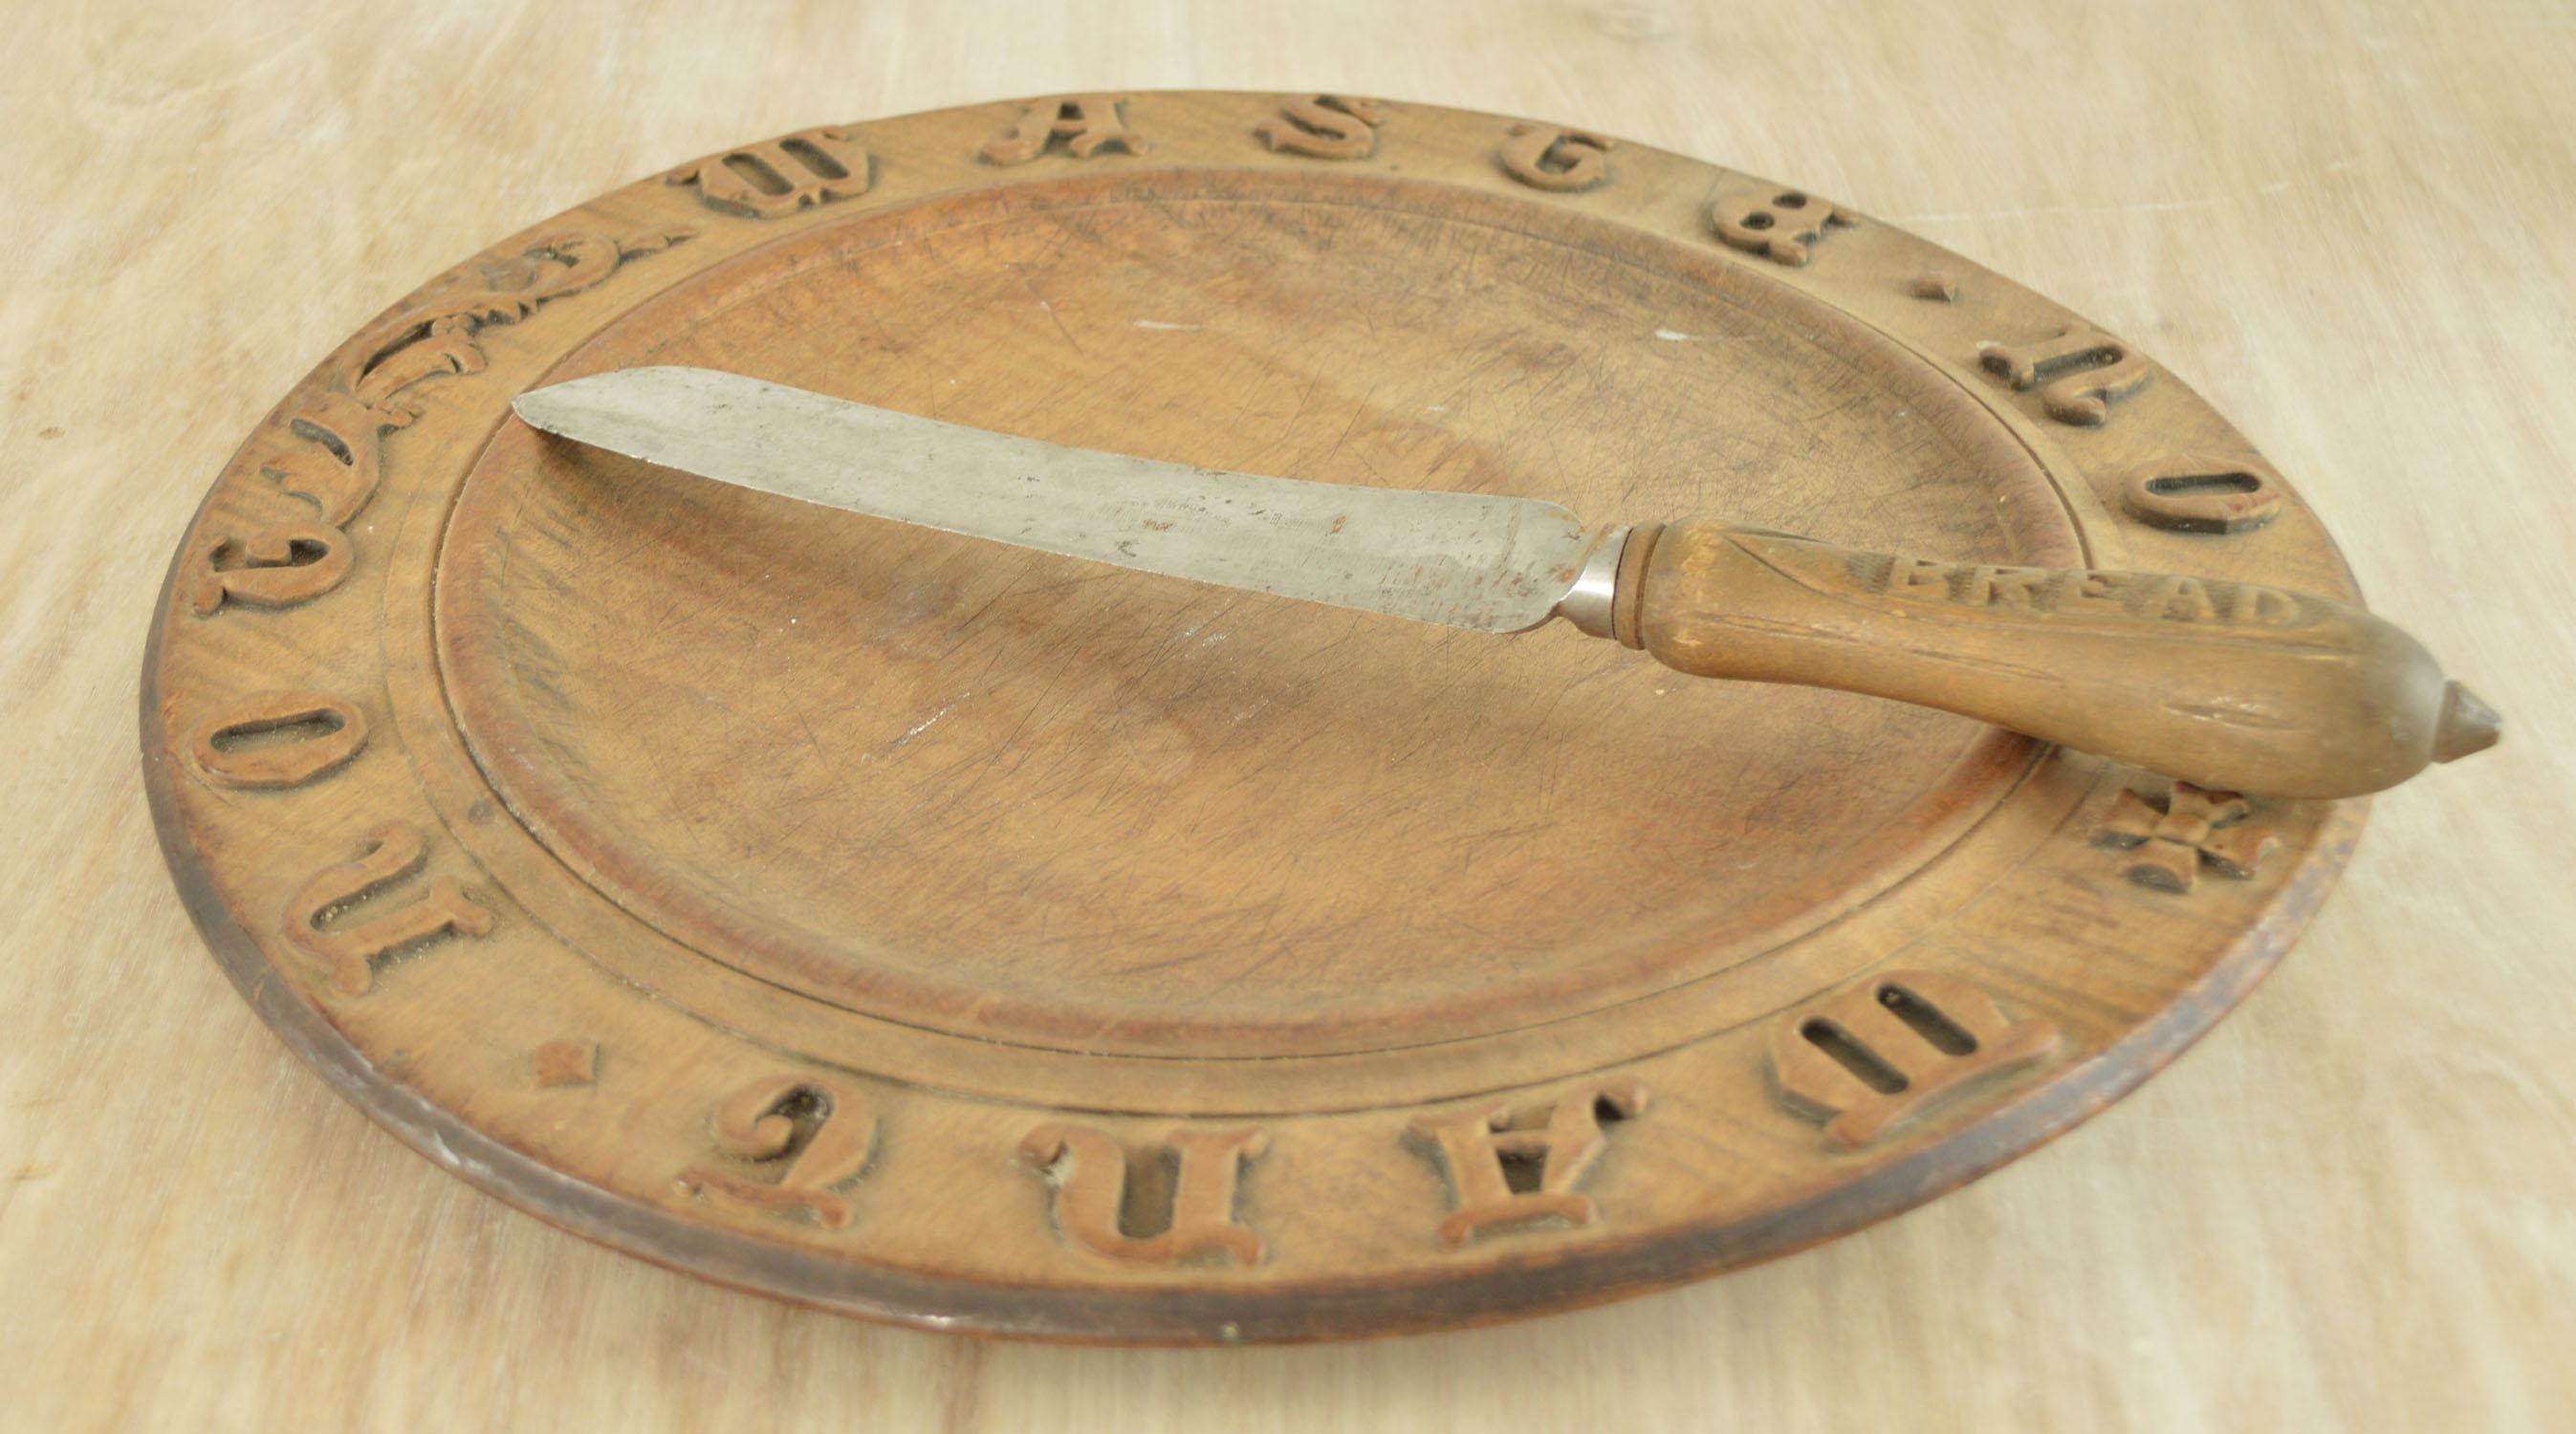 Fabulous bread board with the carved inscription waste not want not.

Makers mark of Jordan, 154 Strand, London on the underside.

With the original bread knife.

In unrestored condition.

Slightly warped.

Free shipping.



